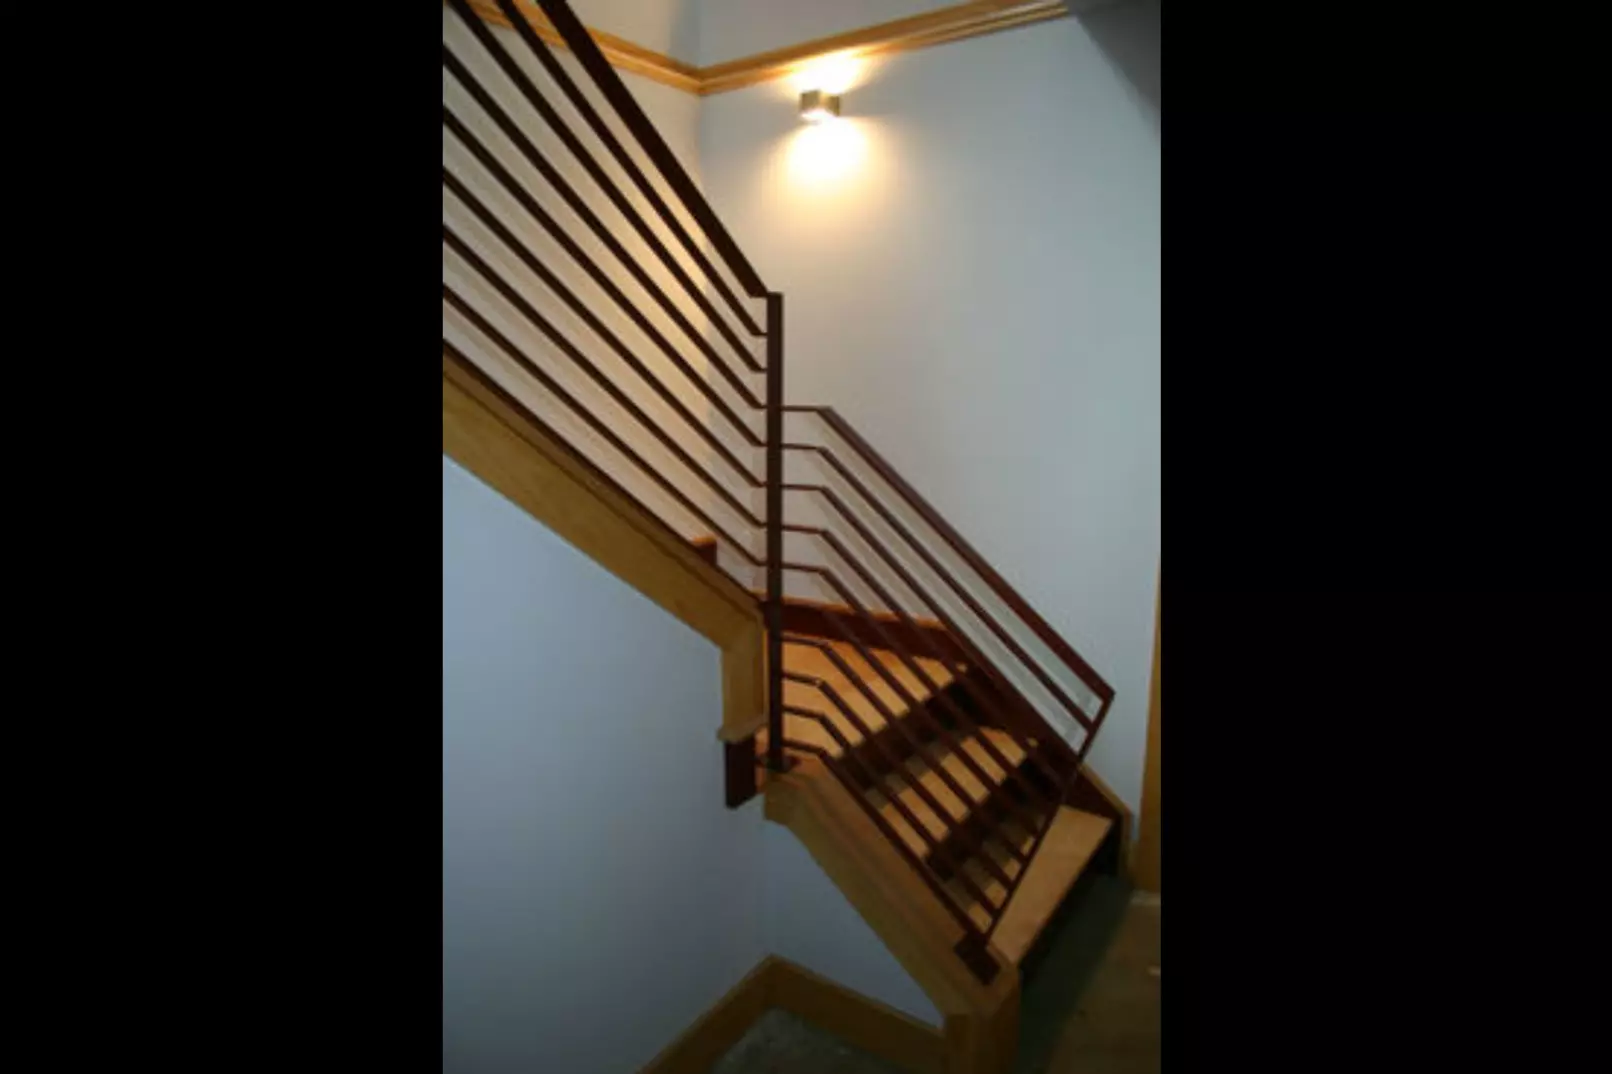 Photo of black reddish-brown metal railing on an indoor residential staircase